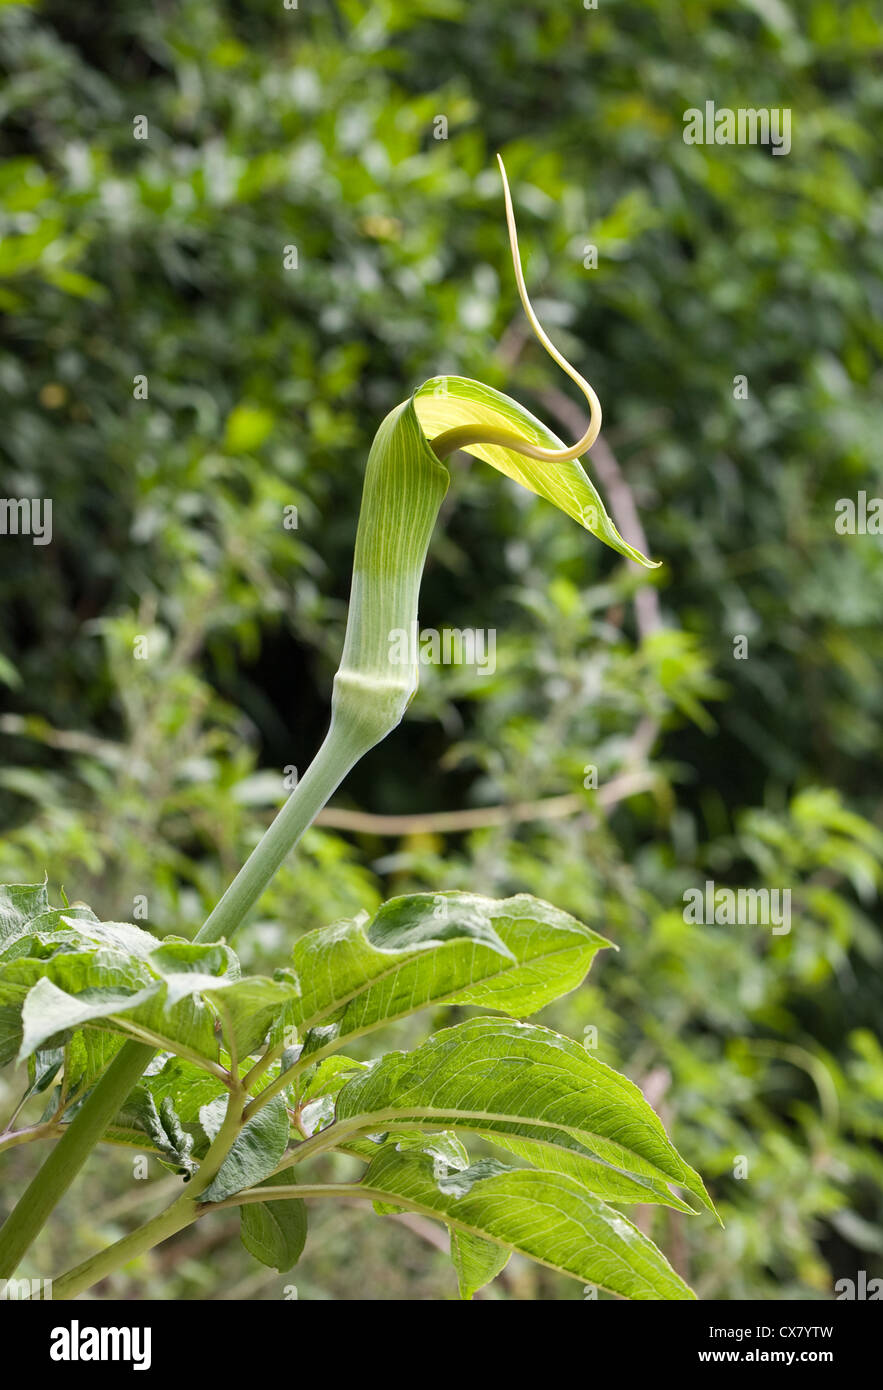 The Whipcord cobra lily is common in lower Tsum Valley, Nepal Stock Photo